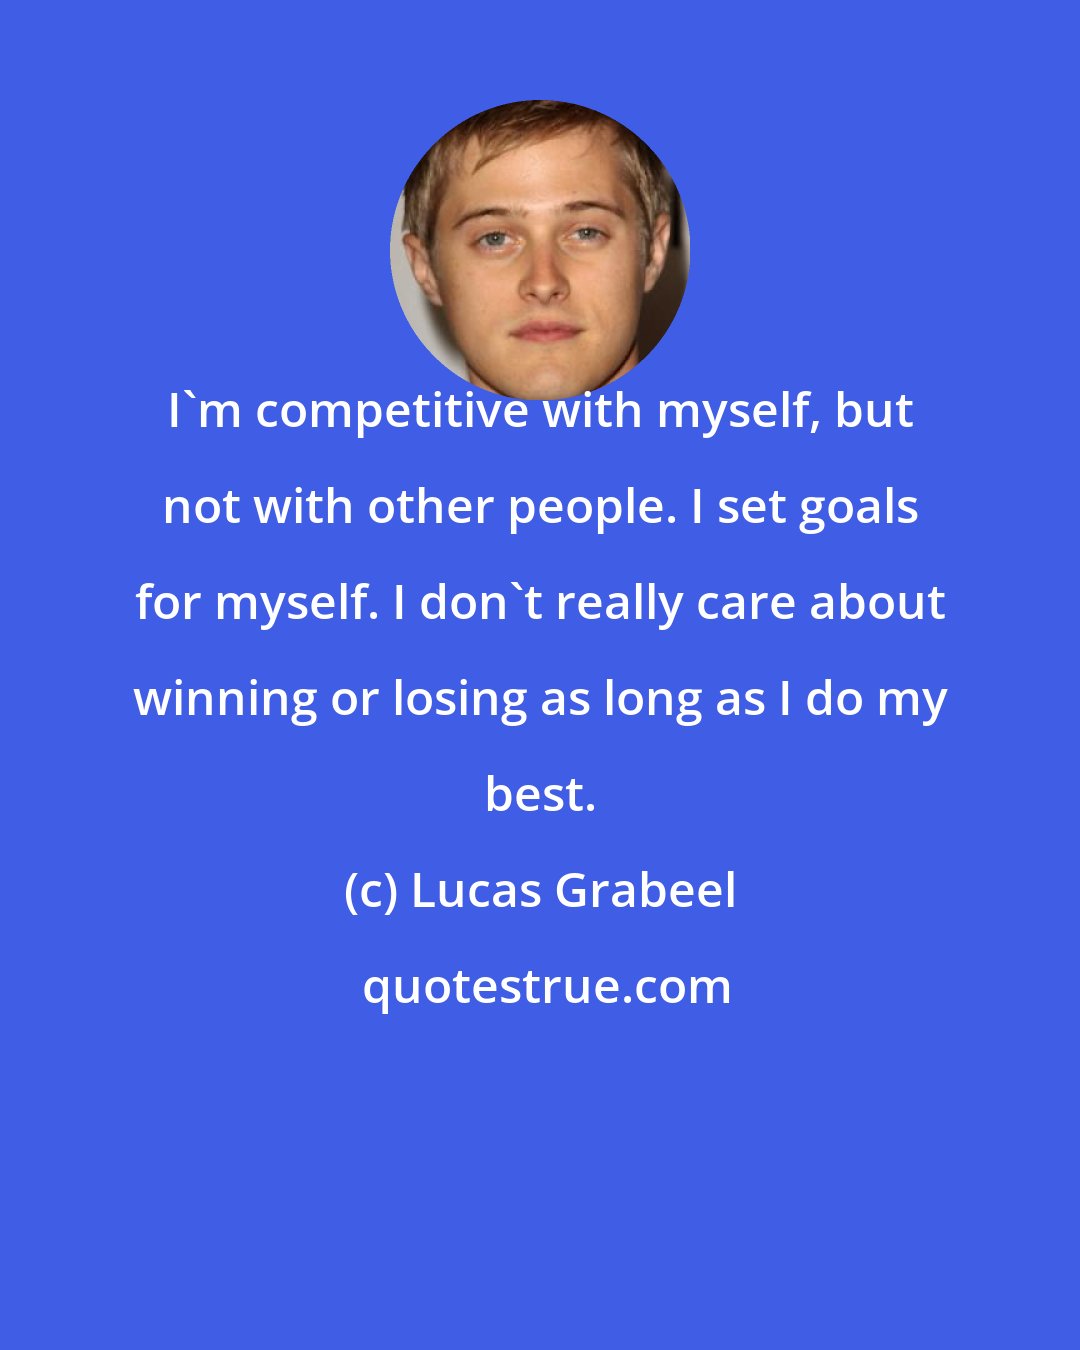 Lucas Grabeel: I'm competitive with myself, but not with other people. I set goals for myself. I don't really care about winning or losing as long as I do my best.